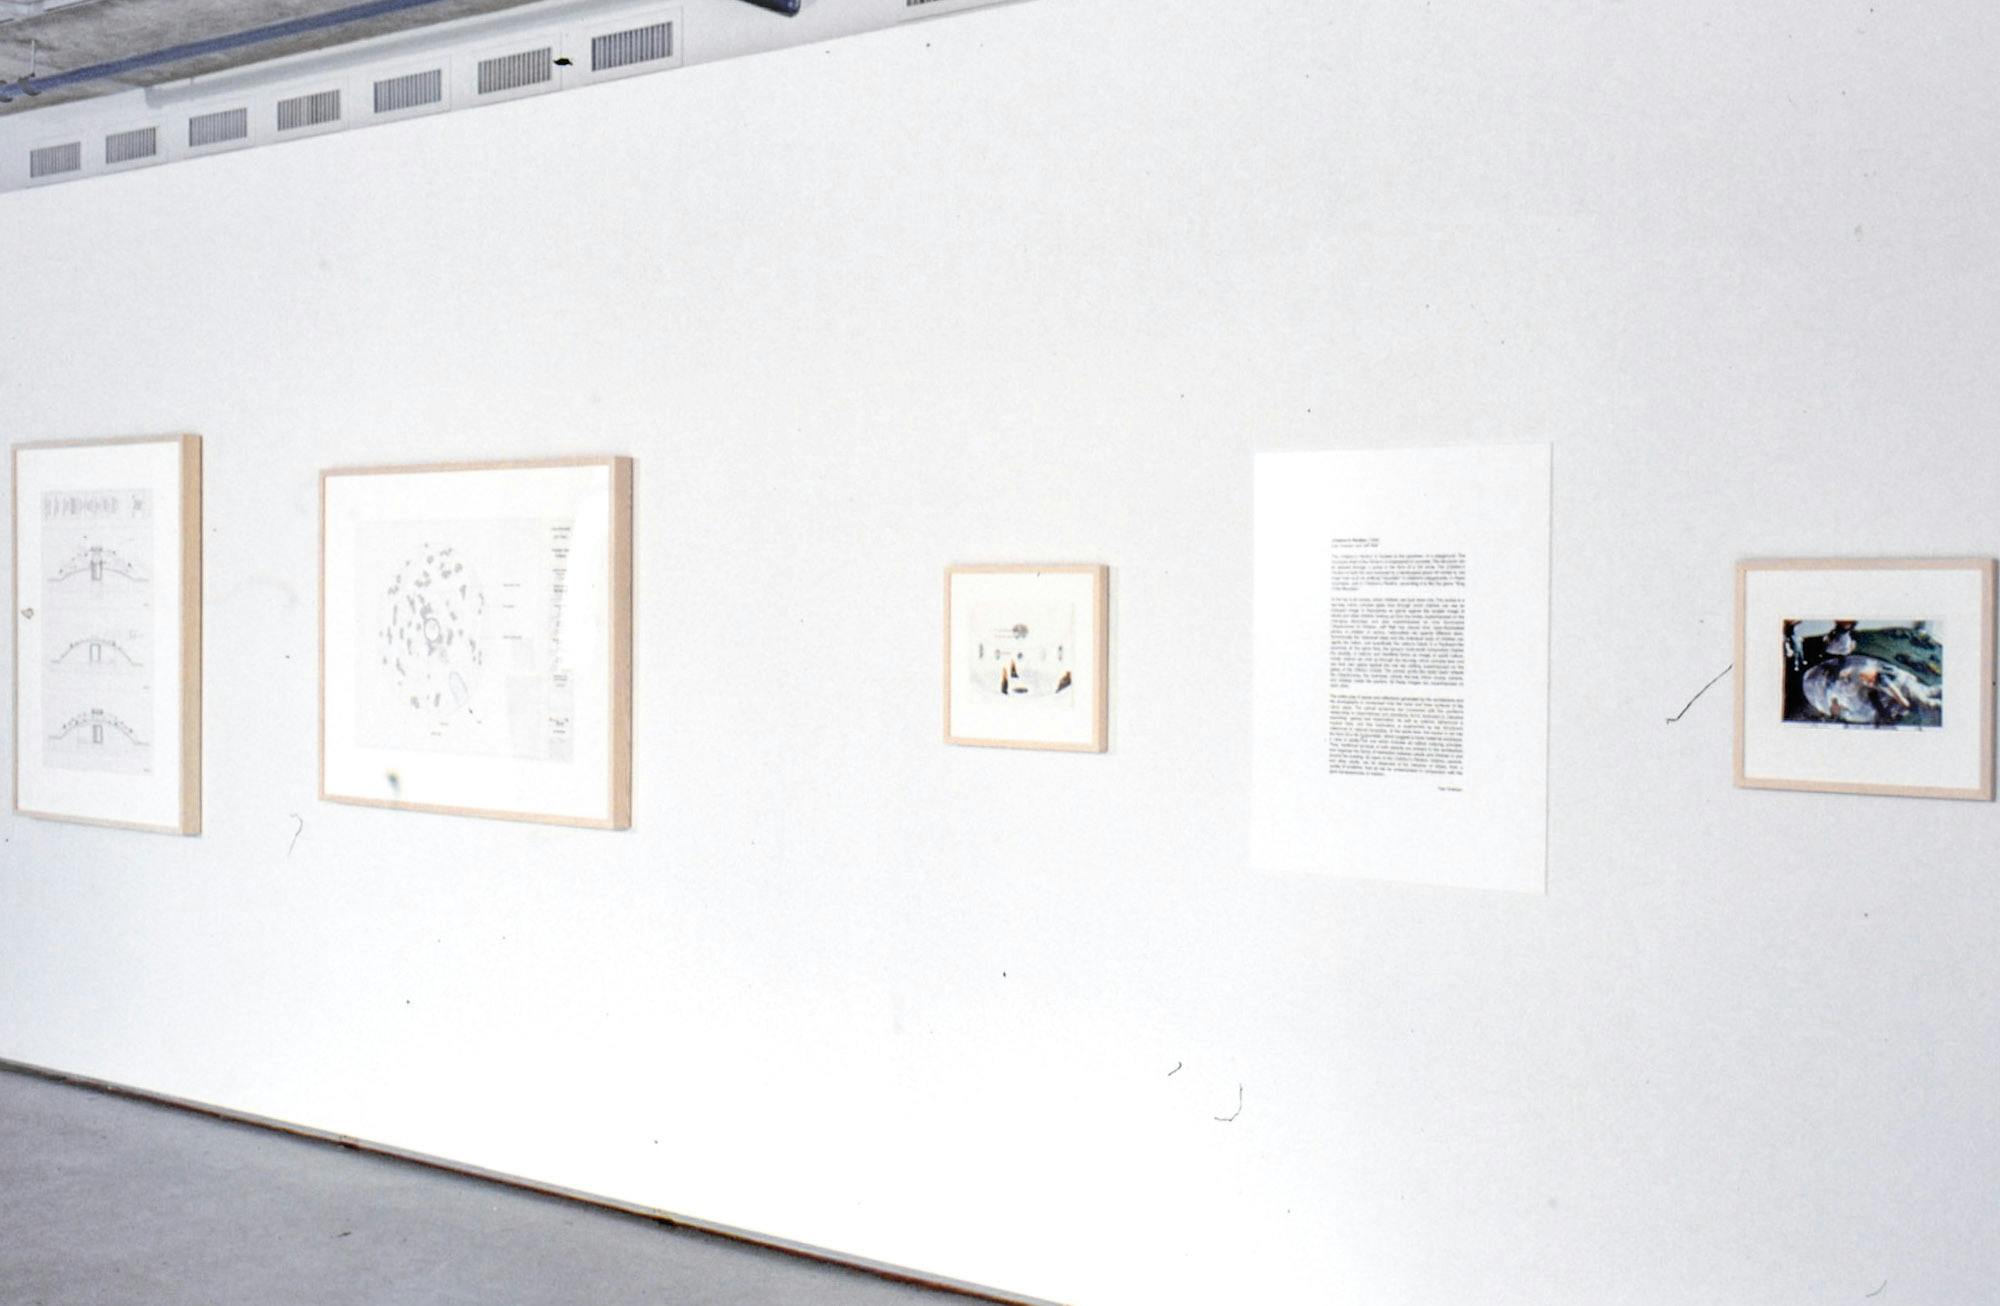 Five artworks are installed on a gallery wall. A text-based work is placed in between a coloured photograph and a drawing. Two large black and white drawings are mounted in the back. 